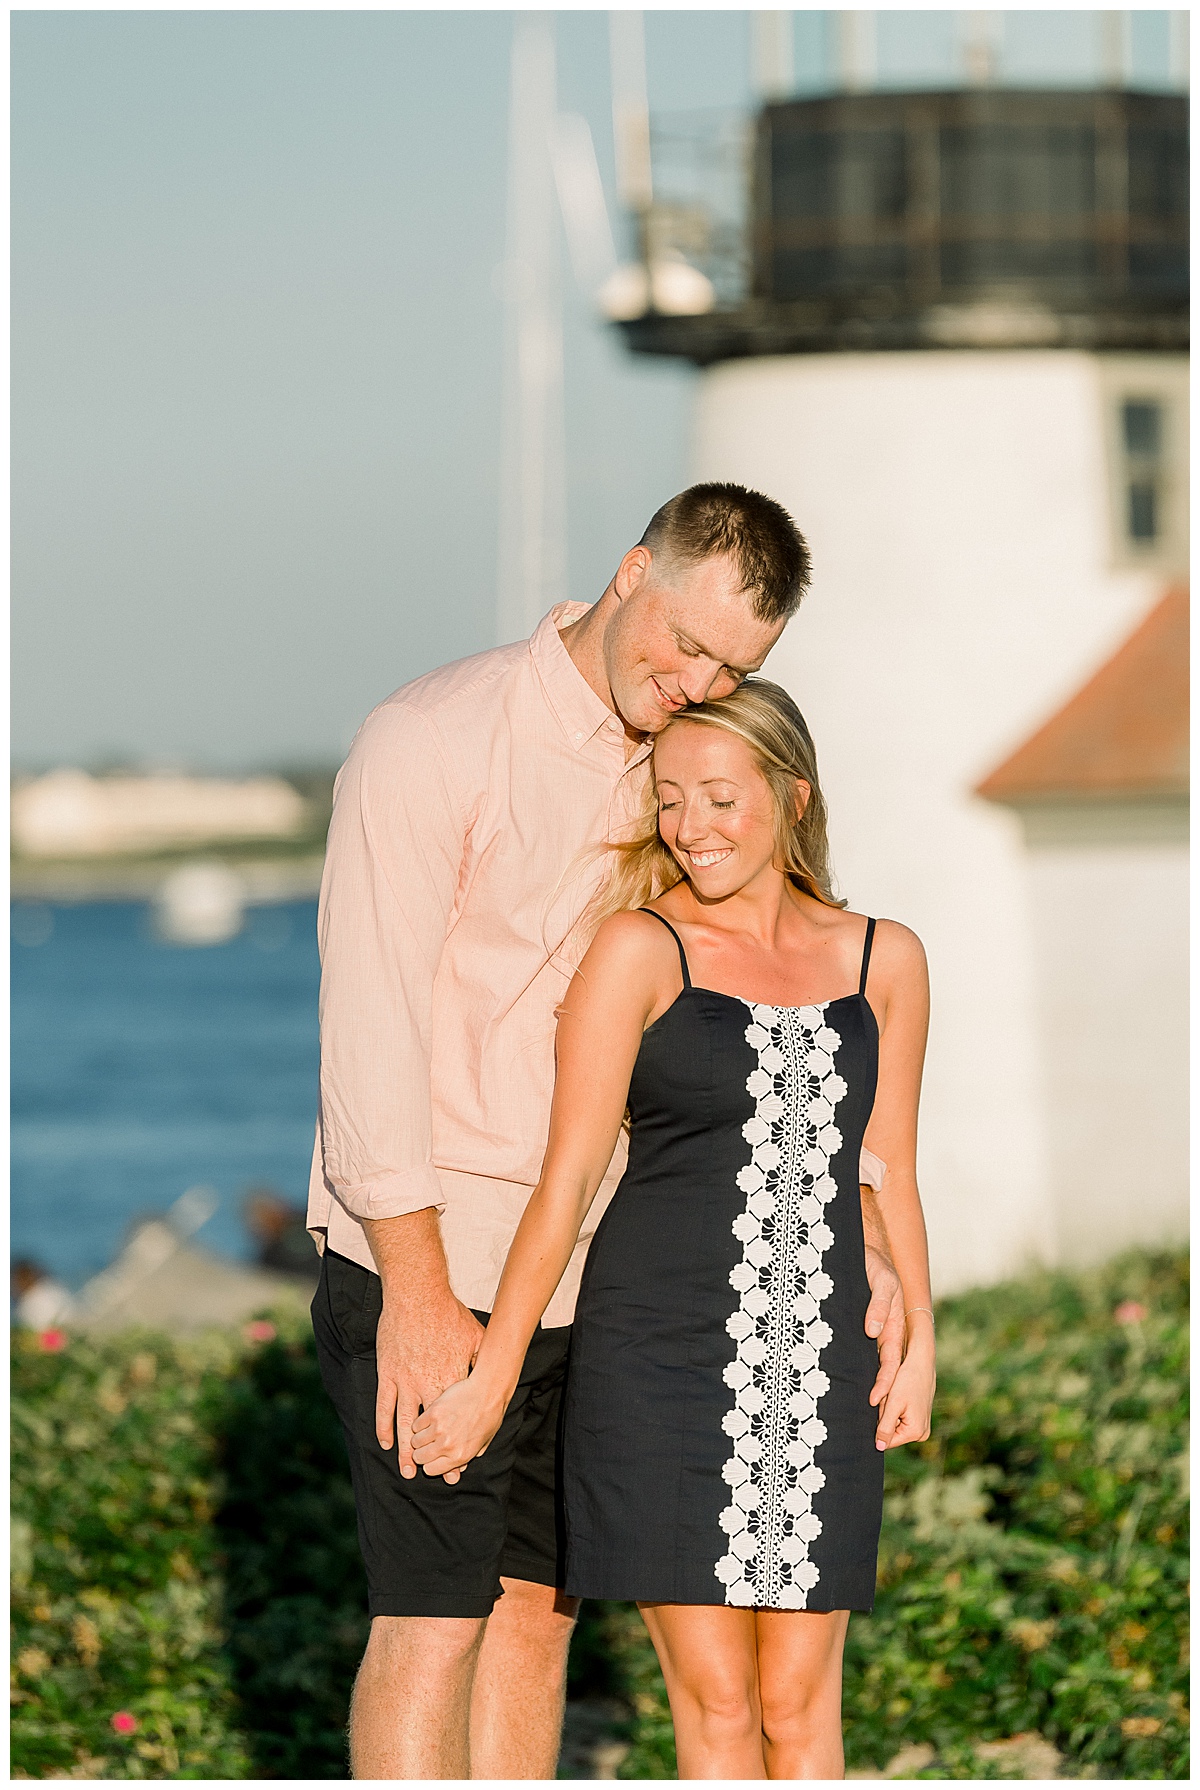 Kylee and Taylor's Nantucket Engagement in Sconset